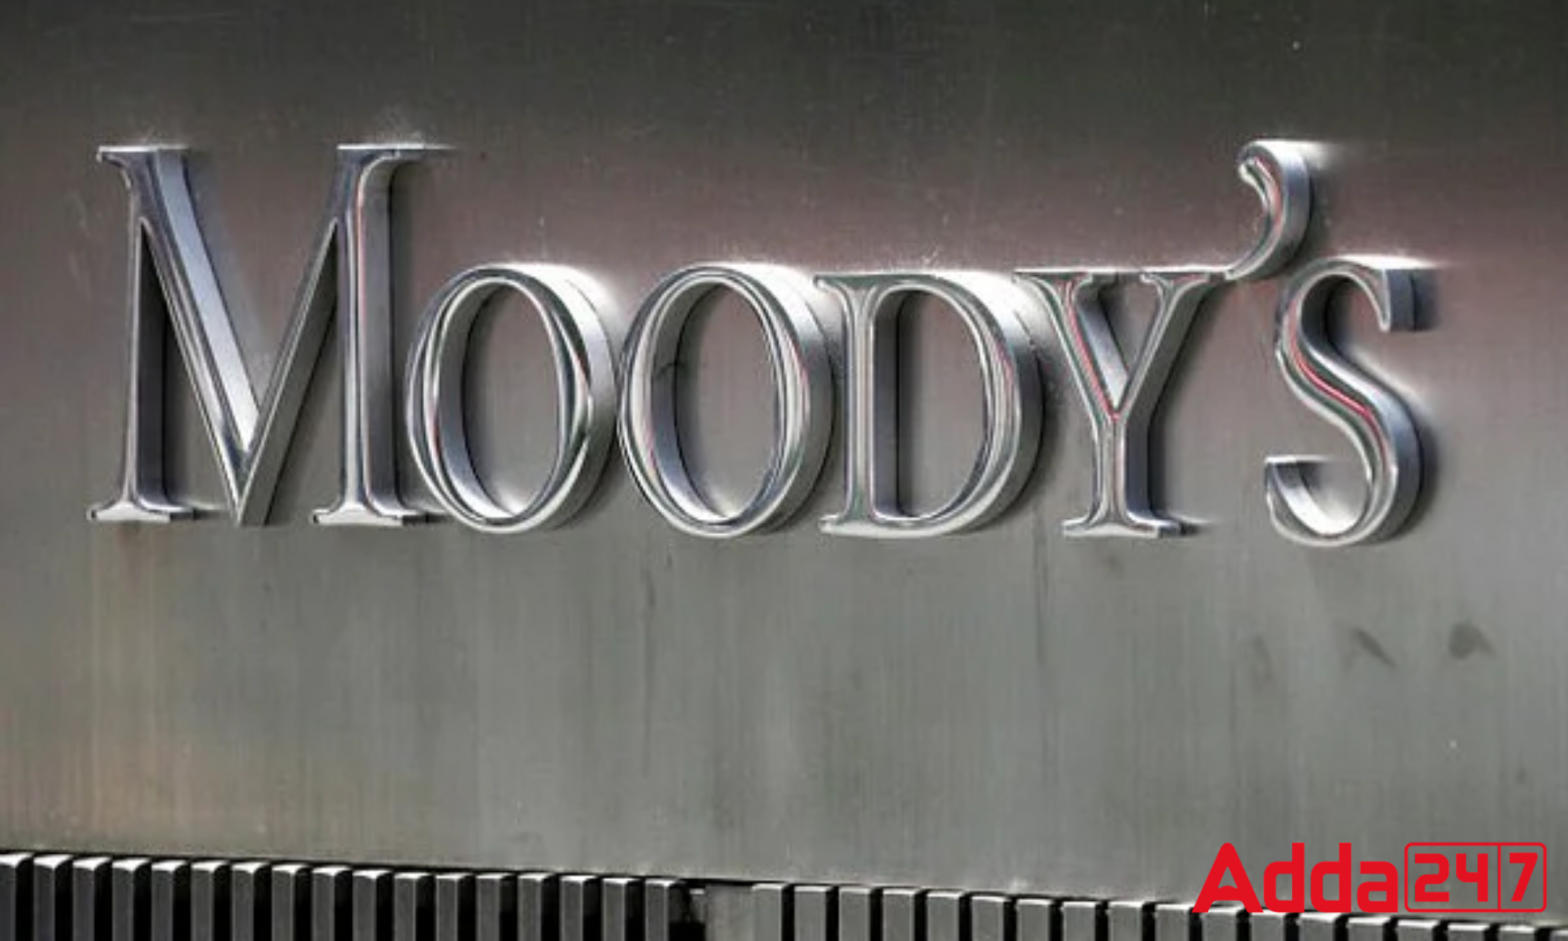 Moody's - India's GDP